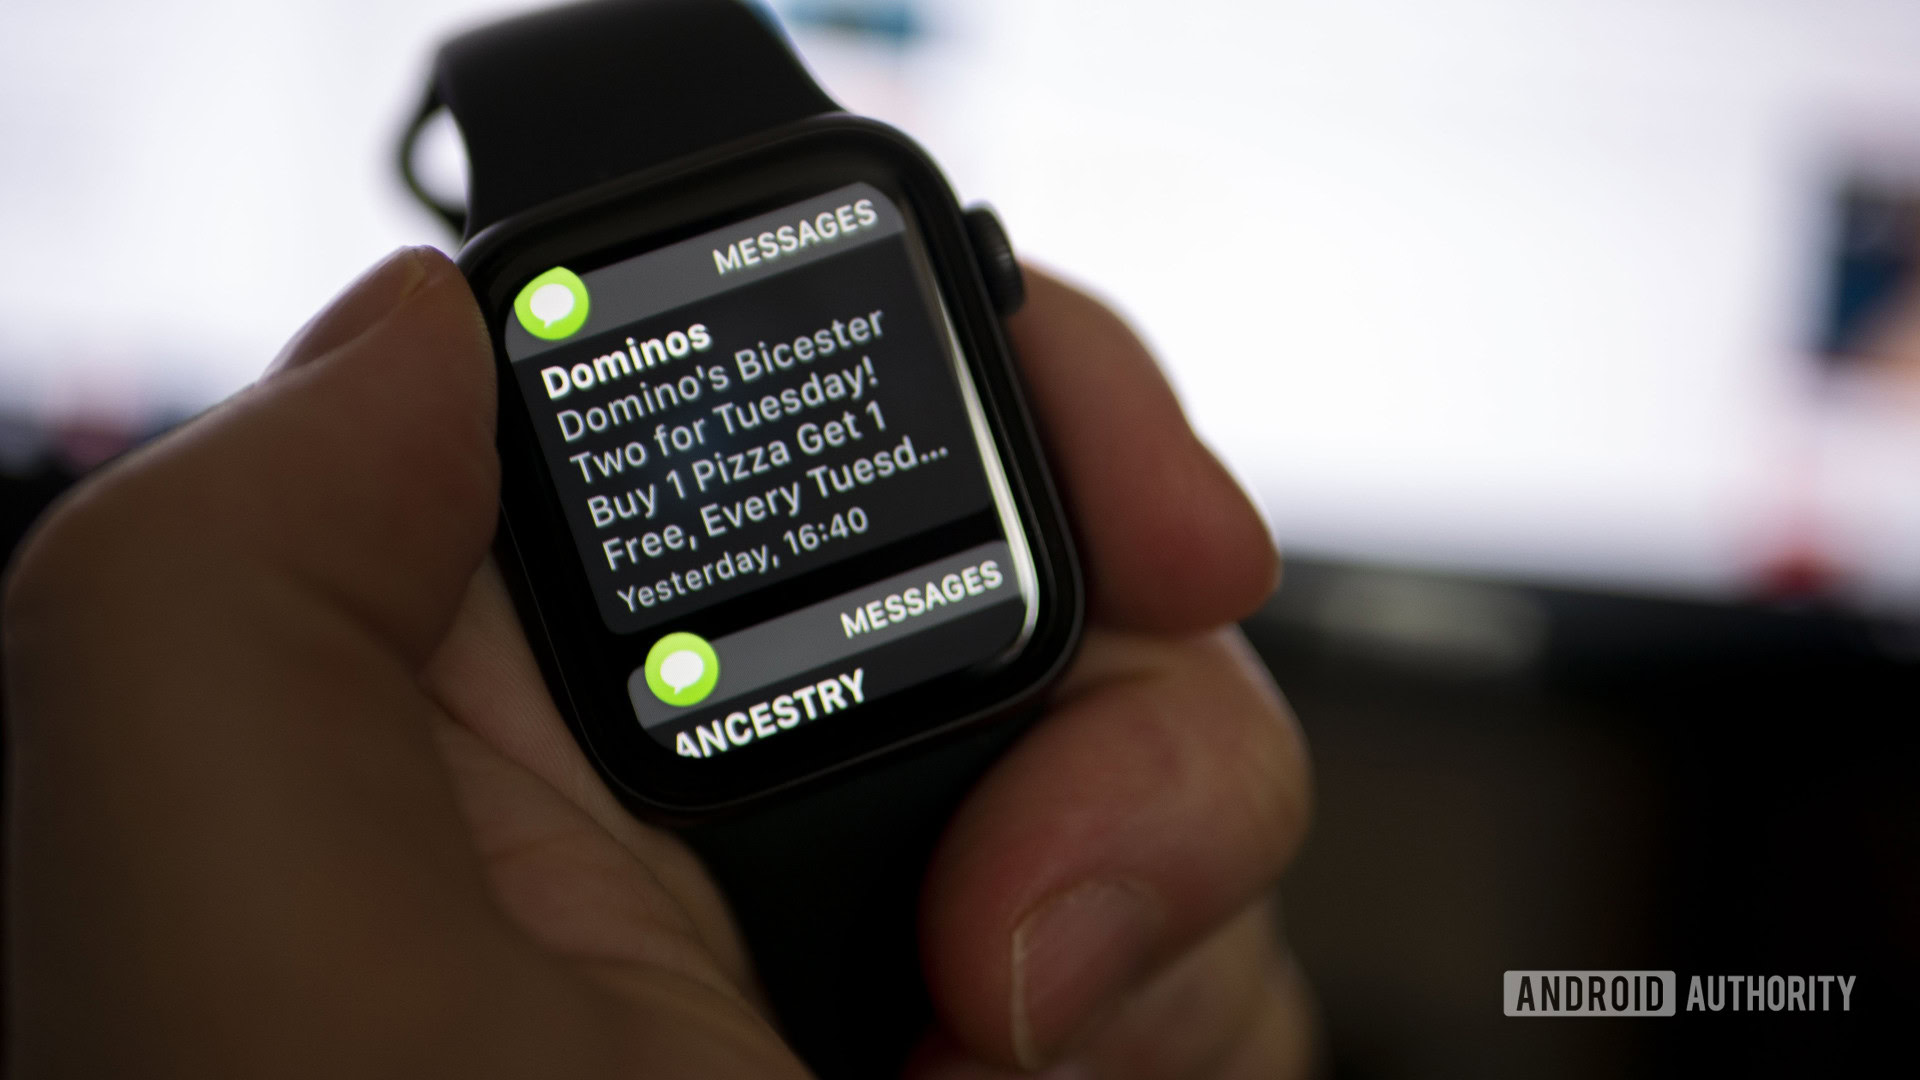 How to clean your Apple Watch in 5 steps